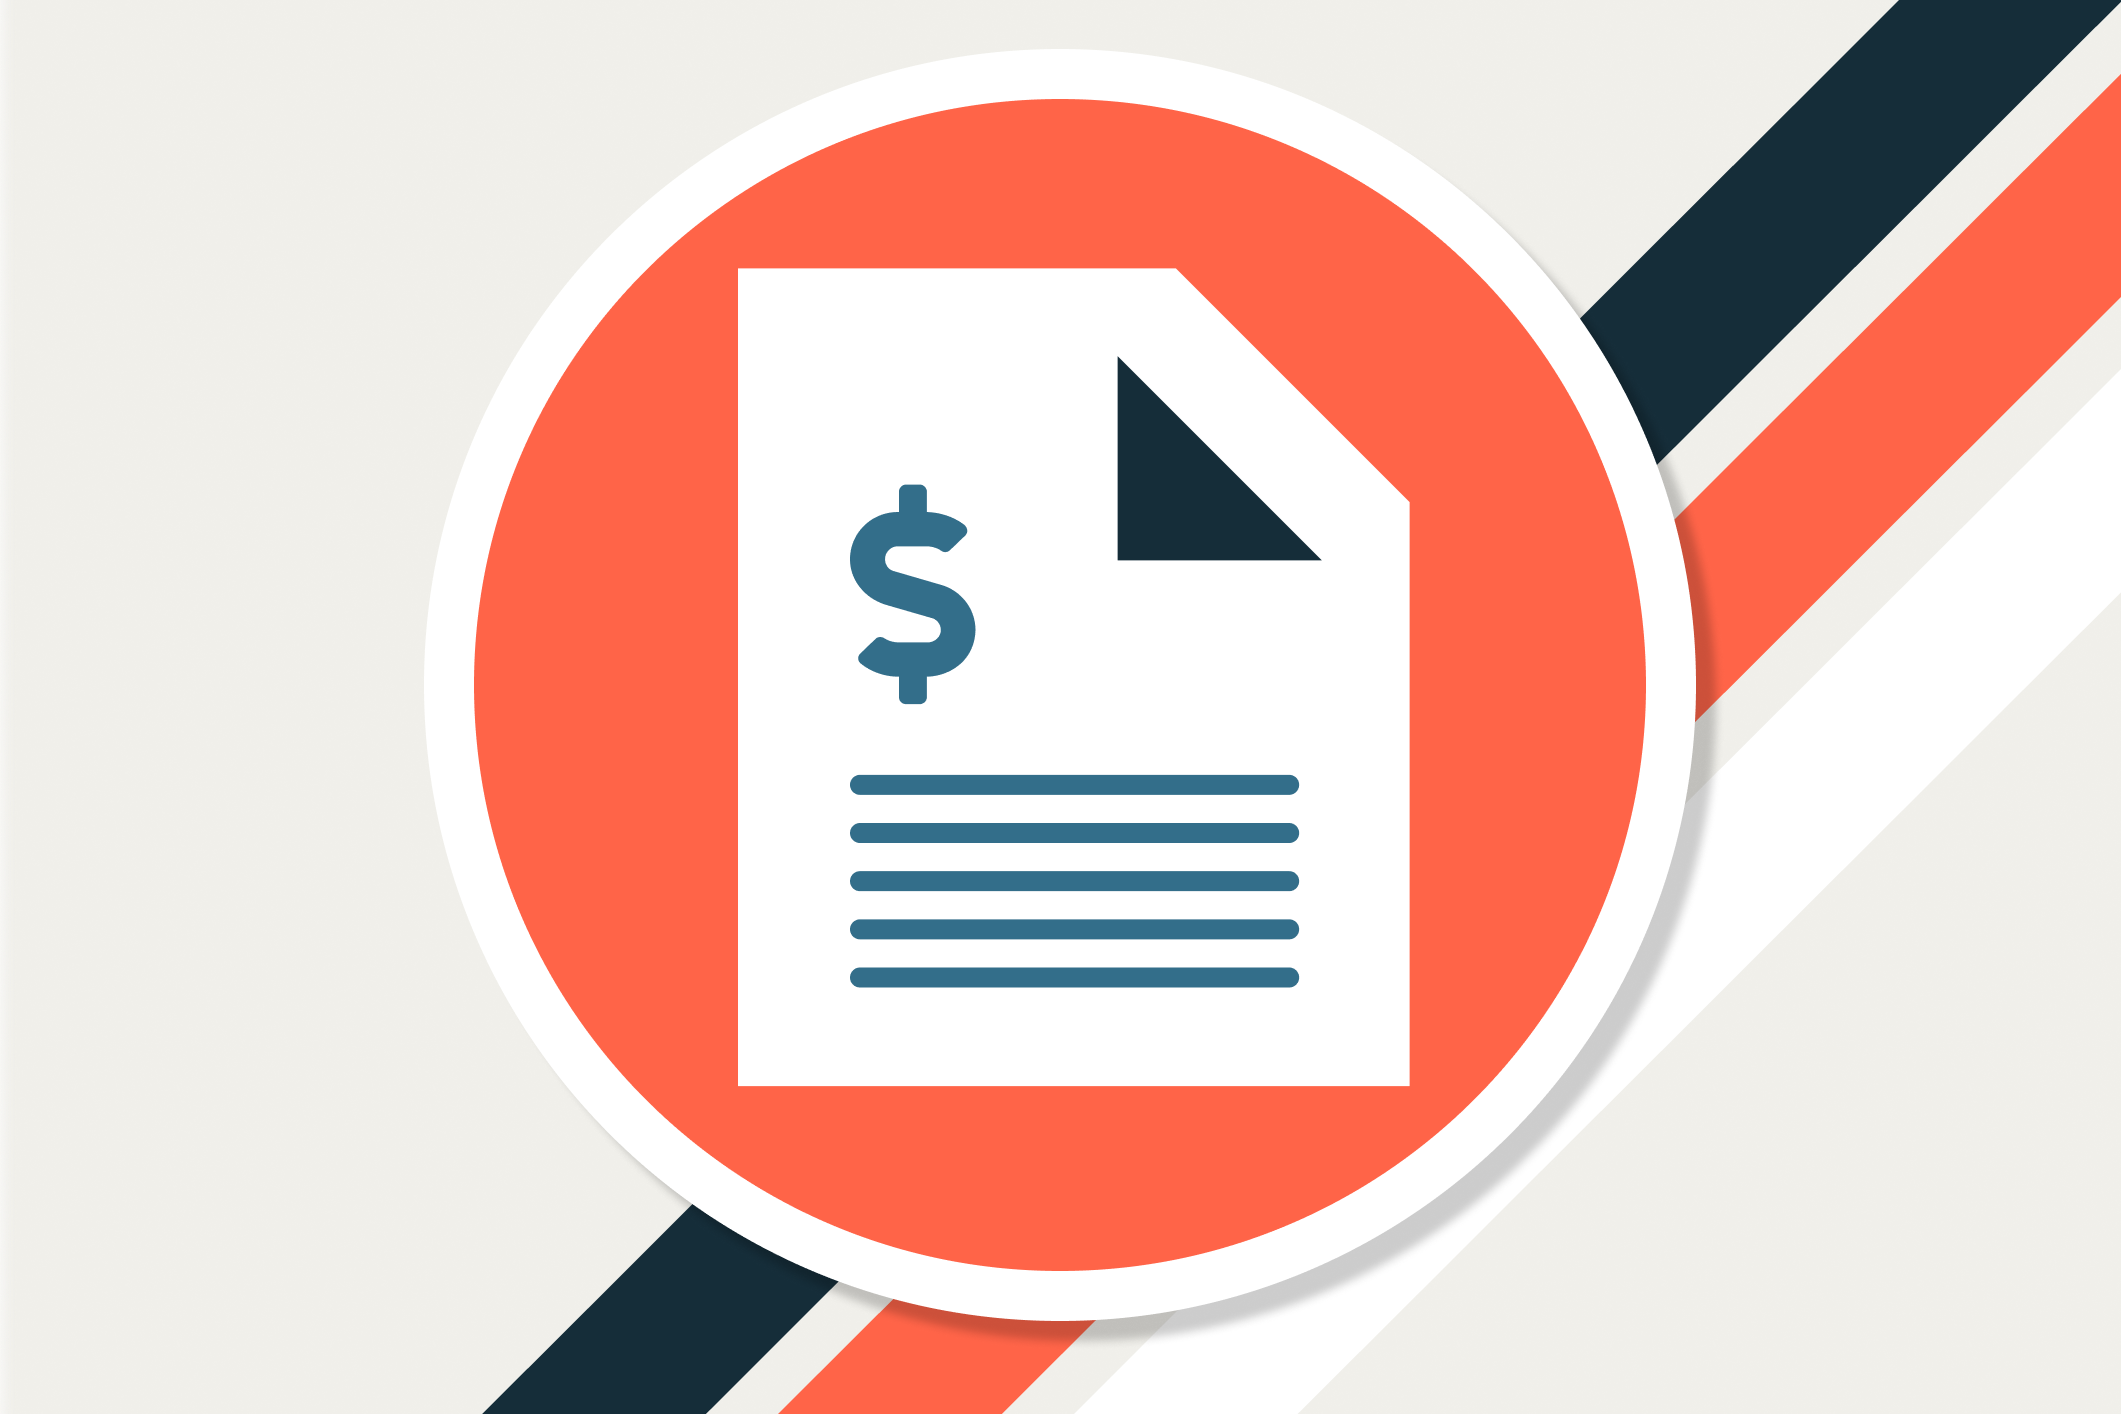 Simple animated icon showing a simplistic expense report.